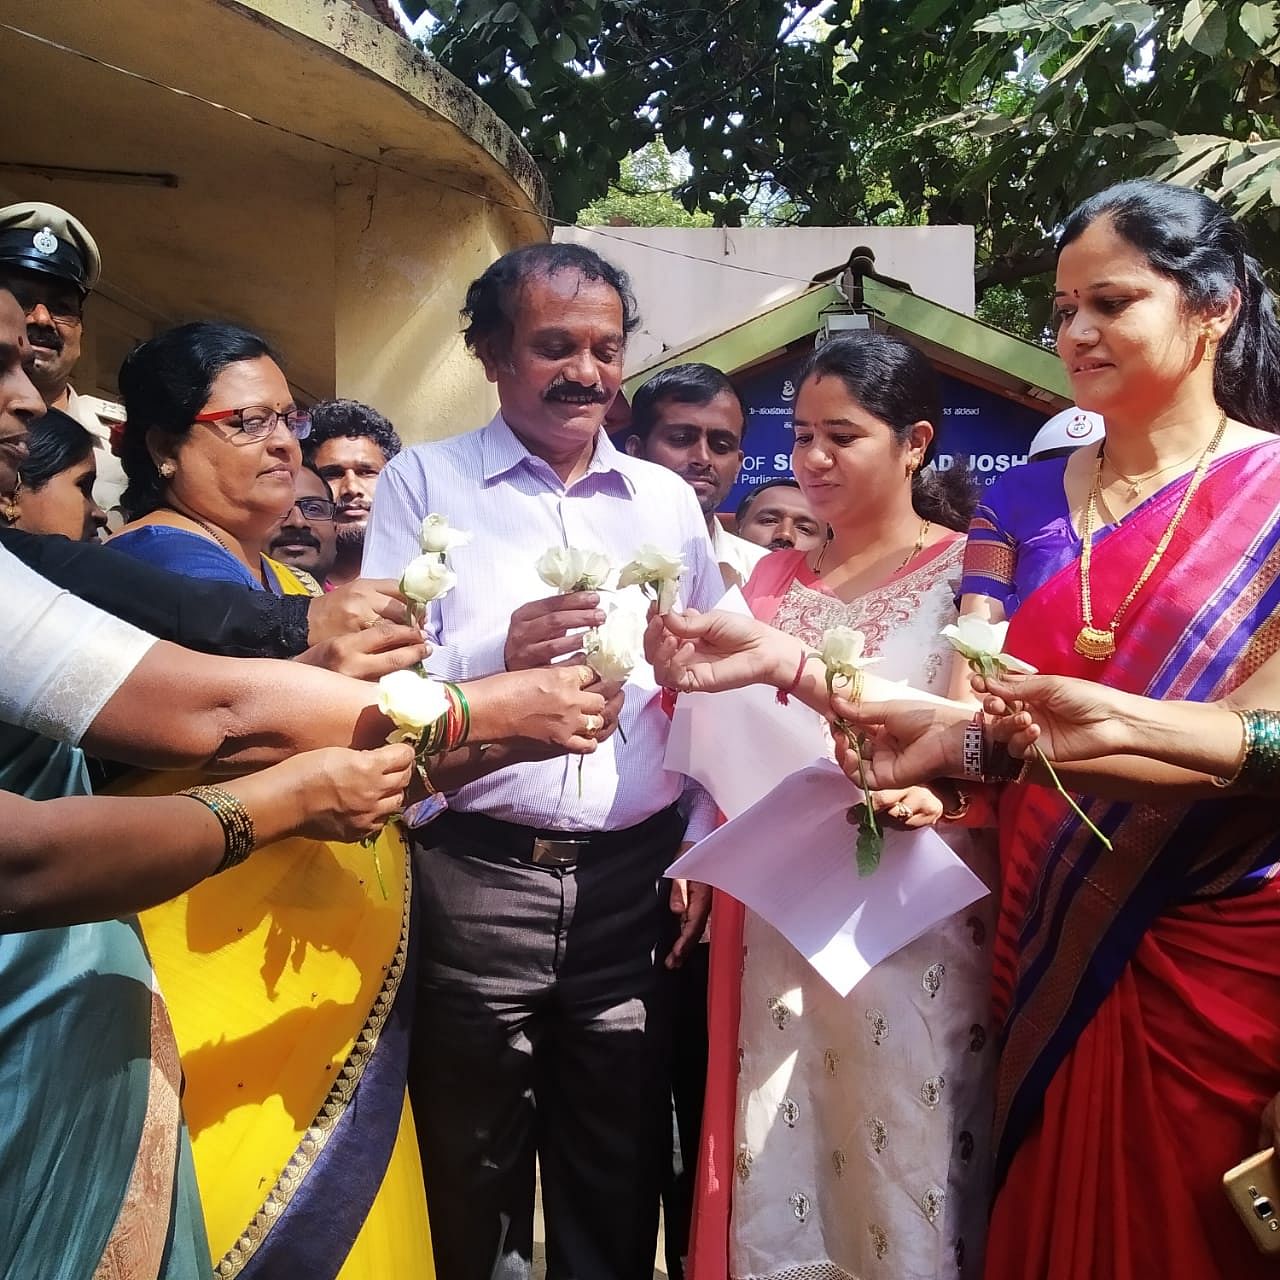 Mahila Congress members presented roses to the staff at Union Minister Pralhad Joshi's office in Hubballi. (DH Photo)